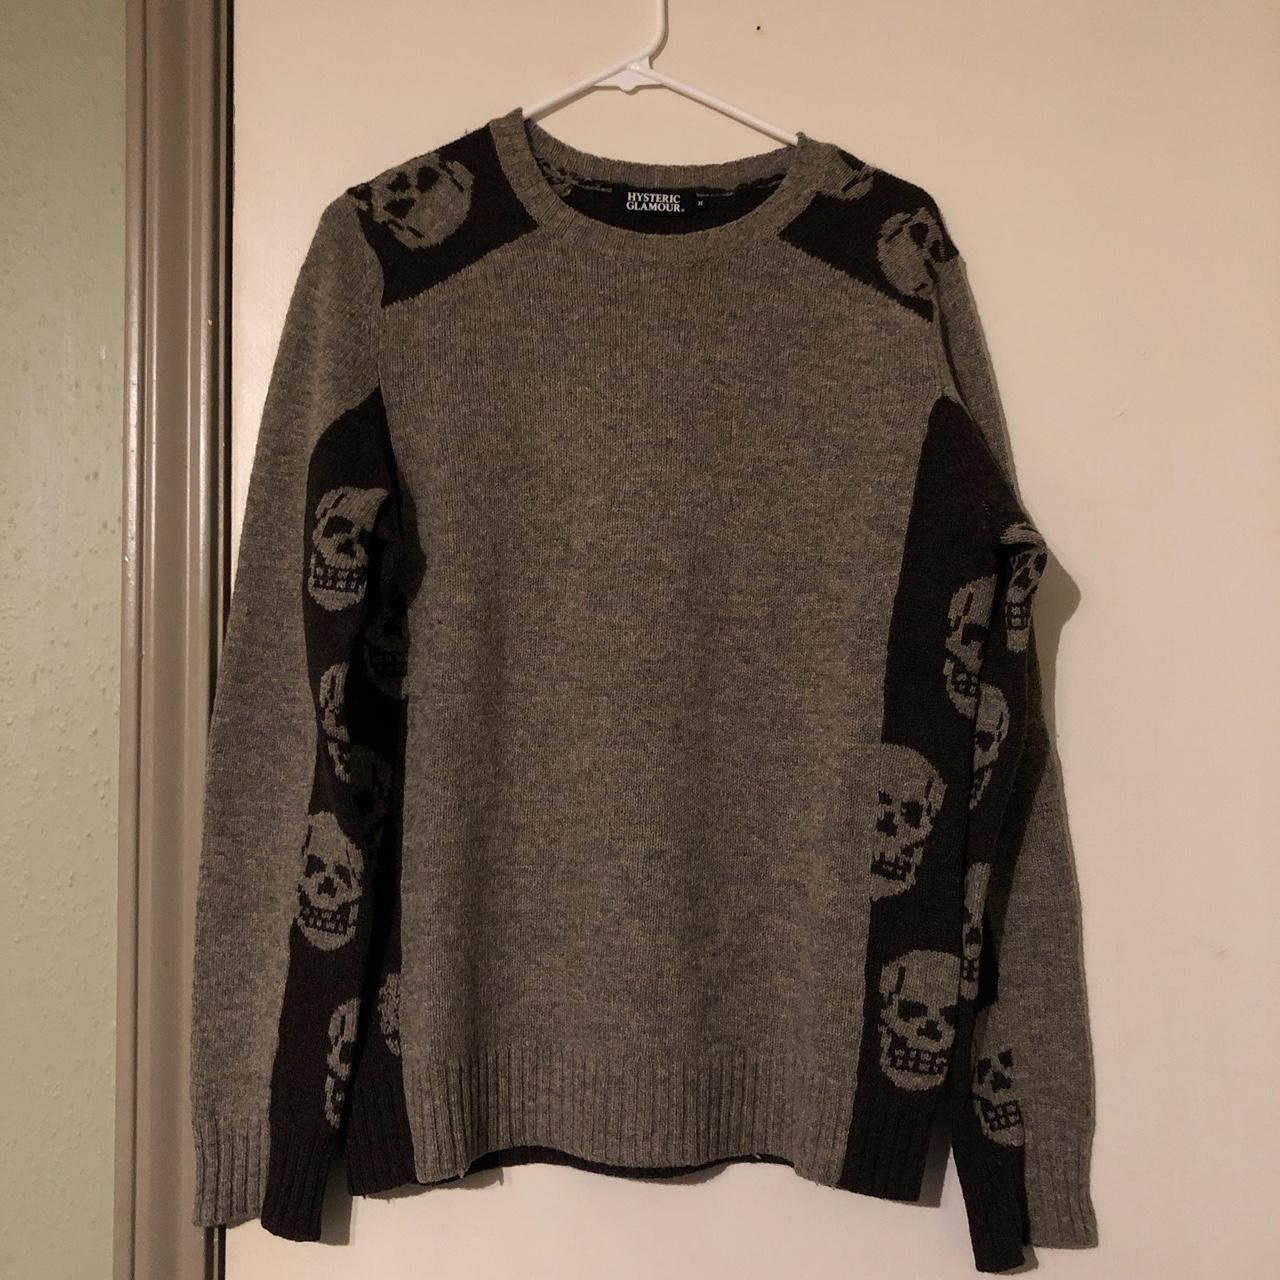 Hysteric Glamour Men's Brown and Black Jumper